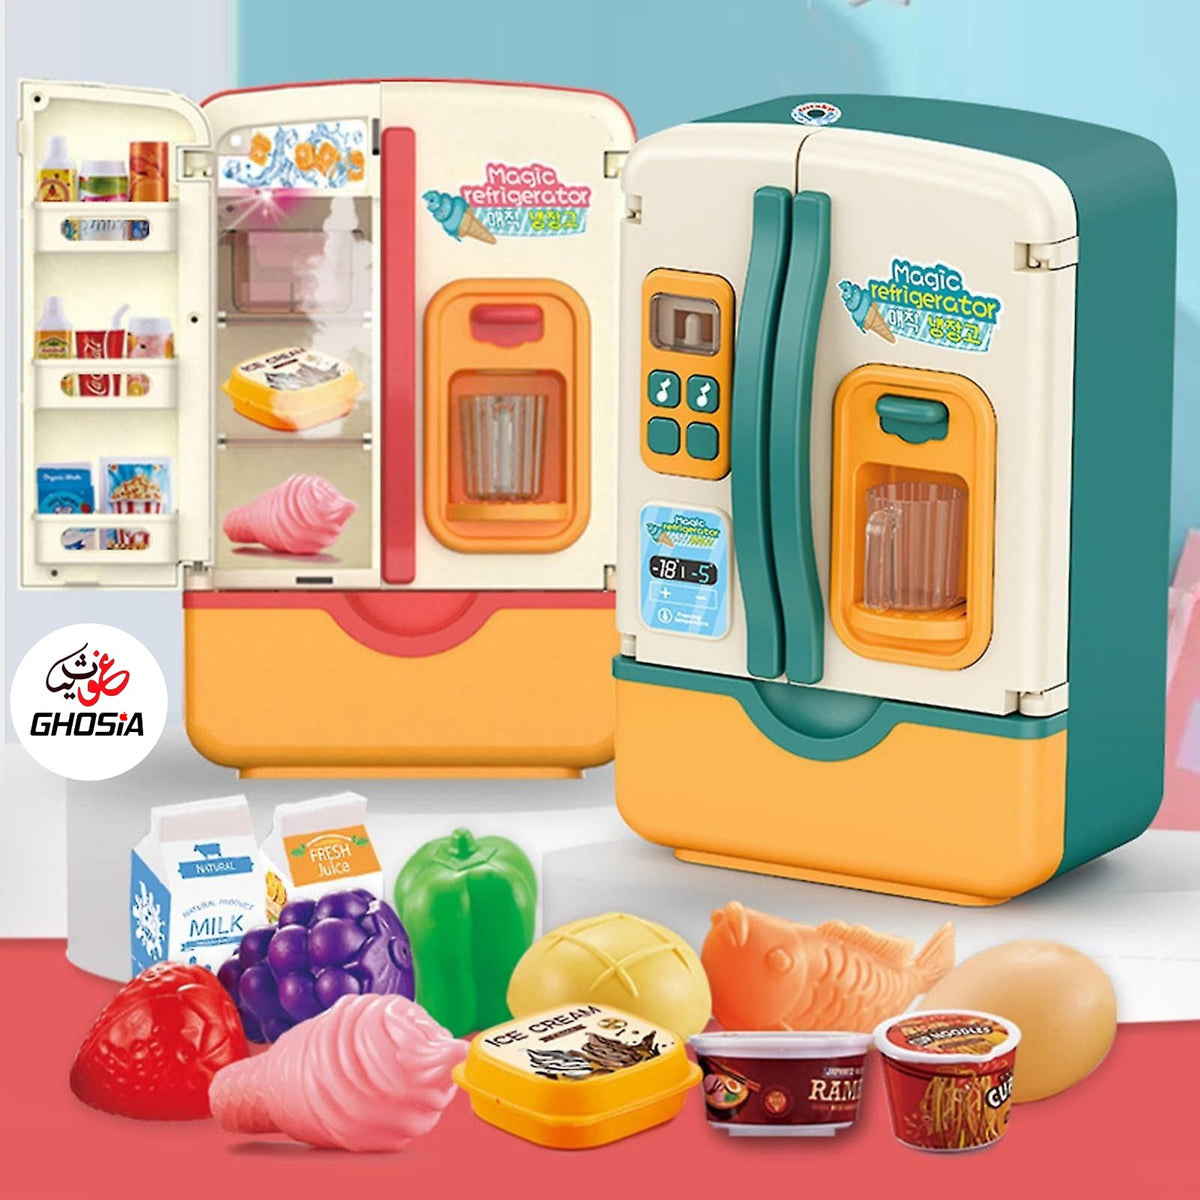 Dollhouse Refrigerator With Cold Icy Spray & Colorful Dazzling Lights & Music Doll Fridge With Fruits And Accessories